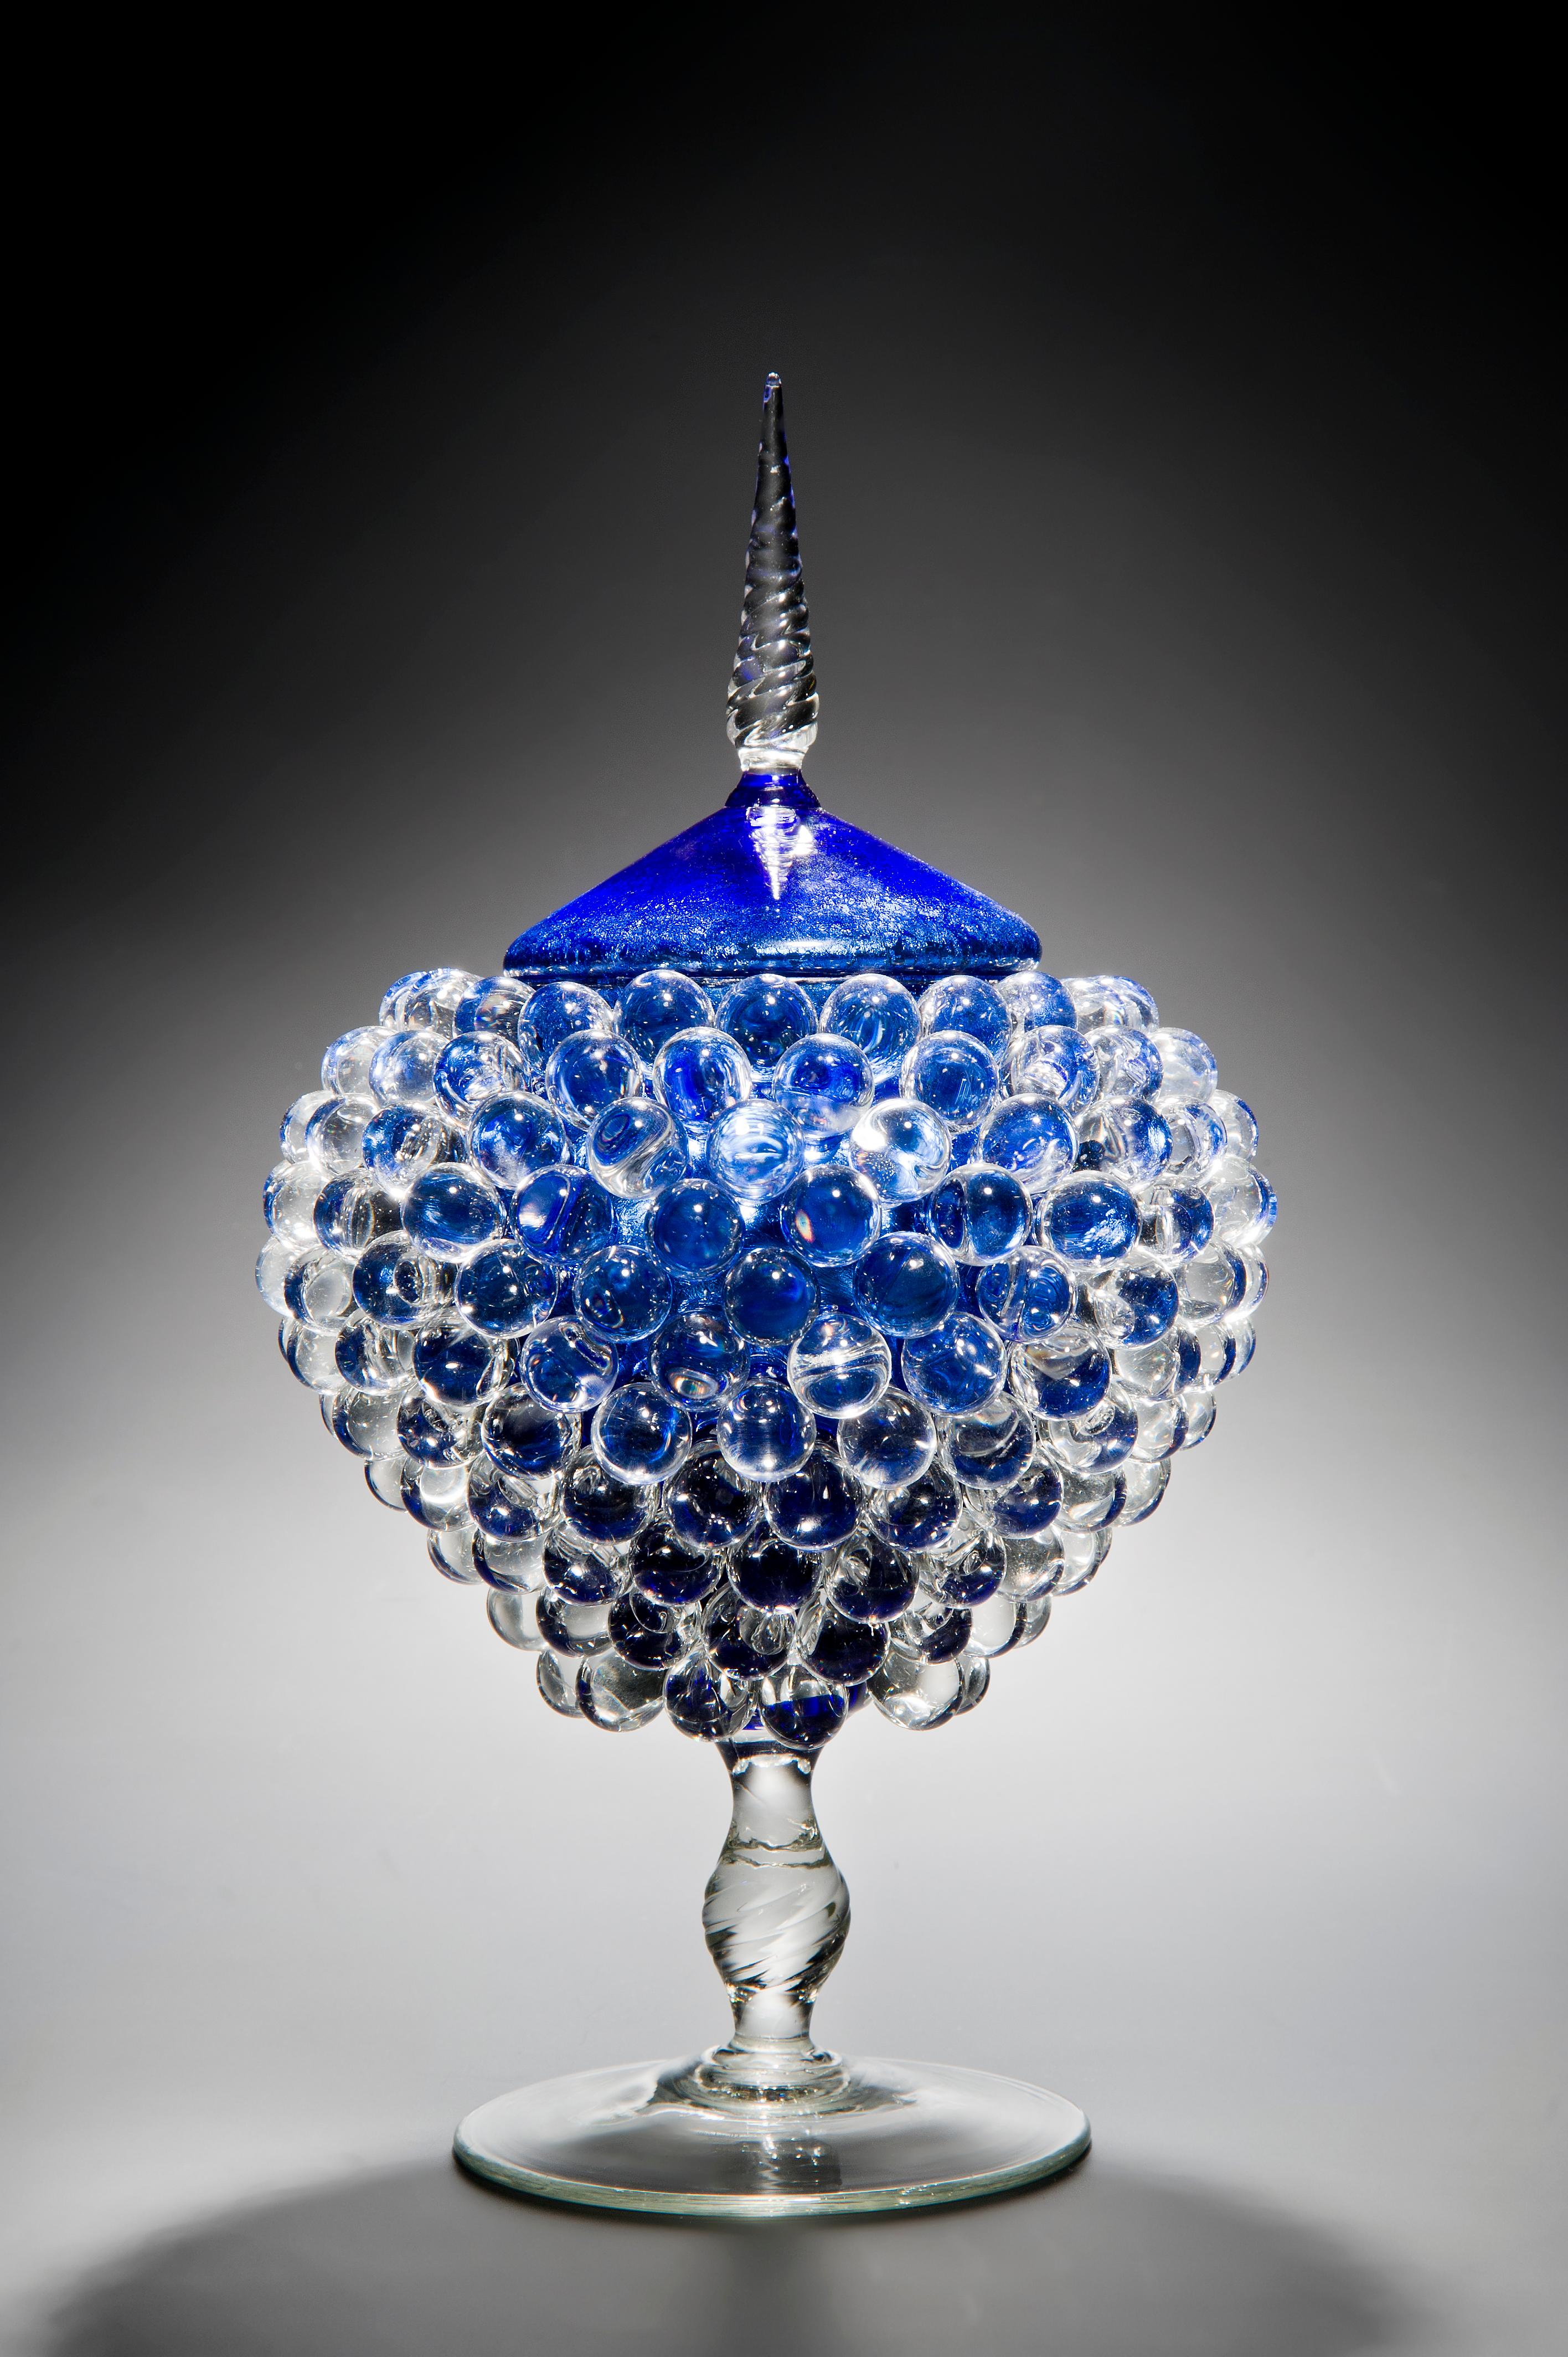 Empoli Jar with Spike, a unique clear & blue glass vessel by James Lethbridge For Sale 2